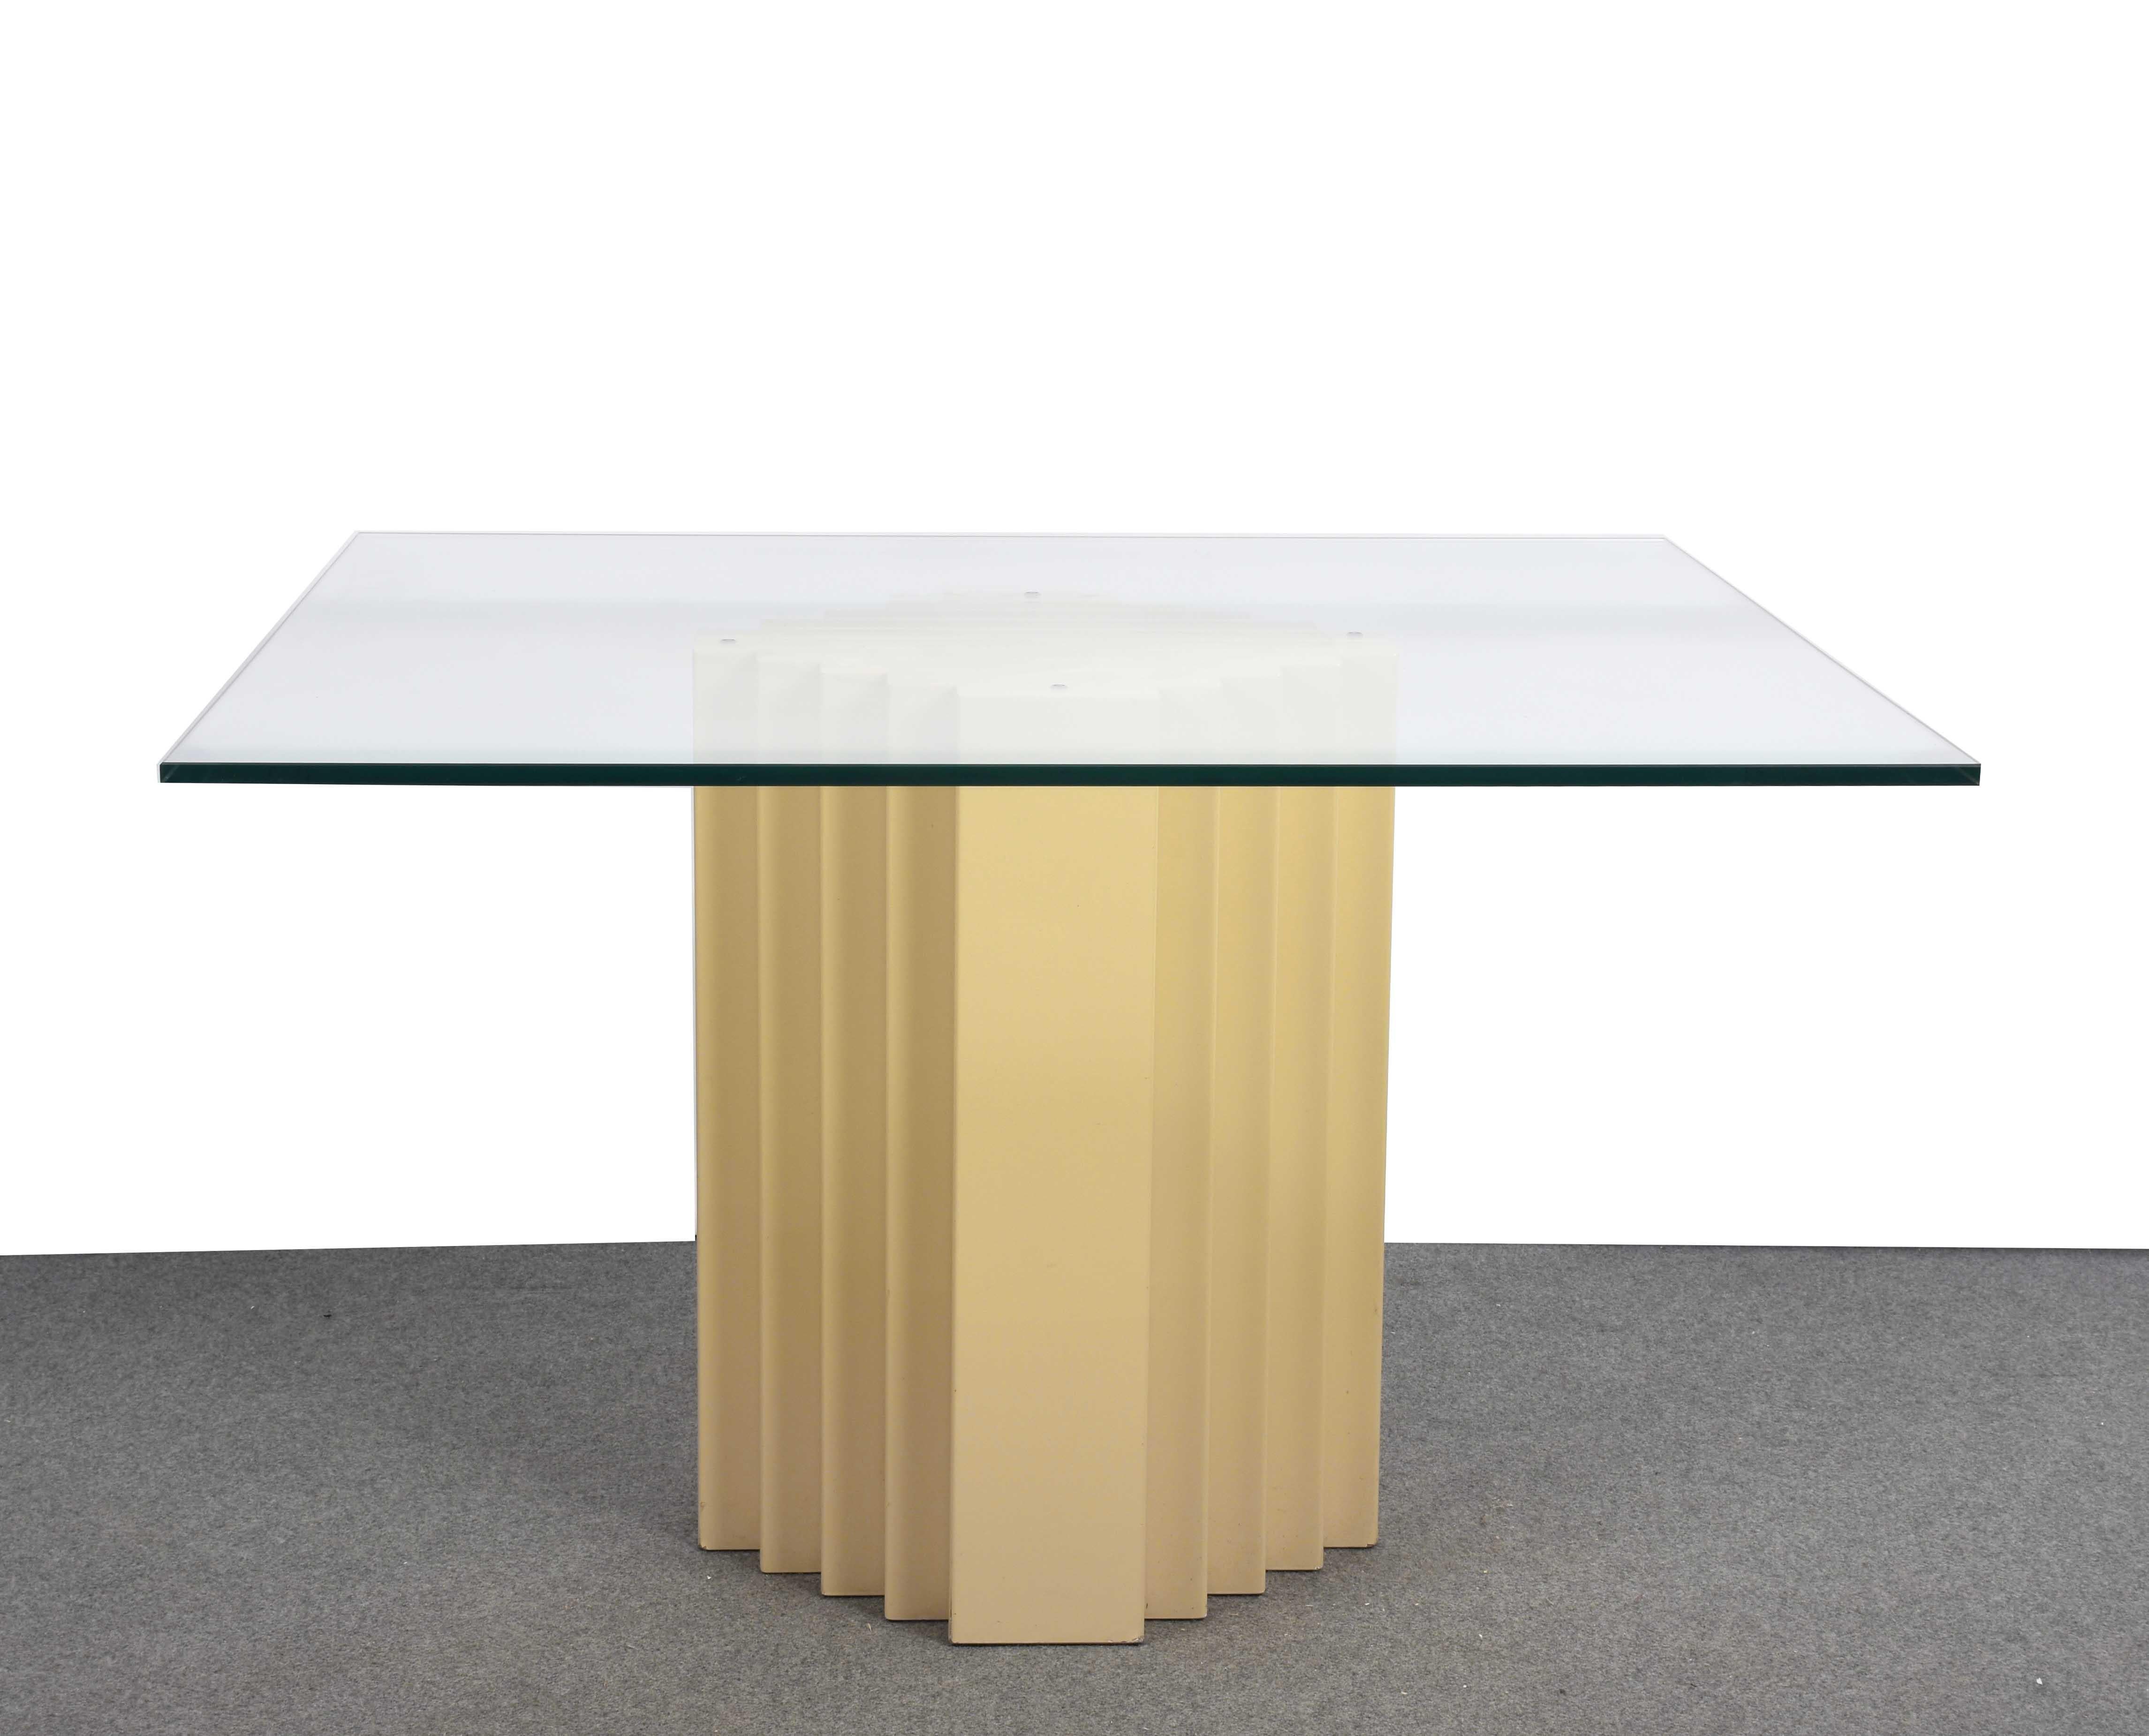 Mid-Century Modern amazing lacquered cream-yellow dining table. This wonderful piece was produced in France during 1970s in the style of Alain Delon for Maison Jansen.

This table is magnificent as its lacquered cream wood base is perfectly